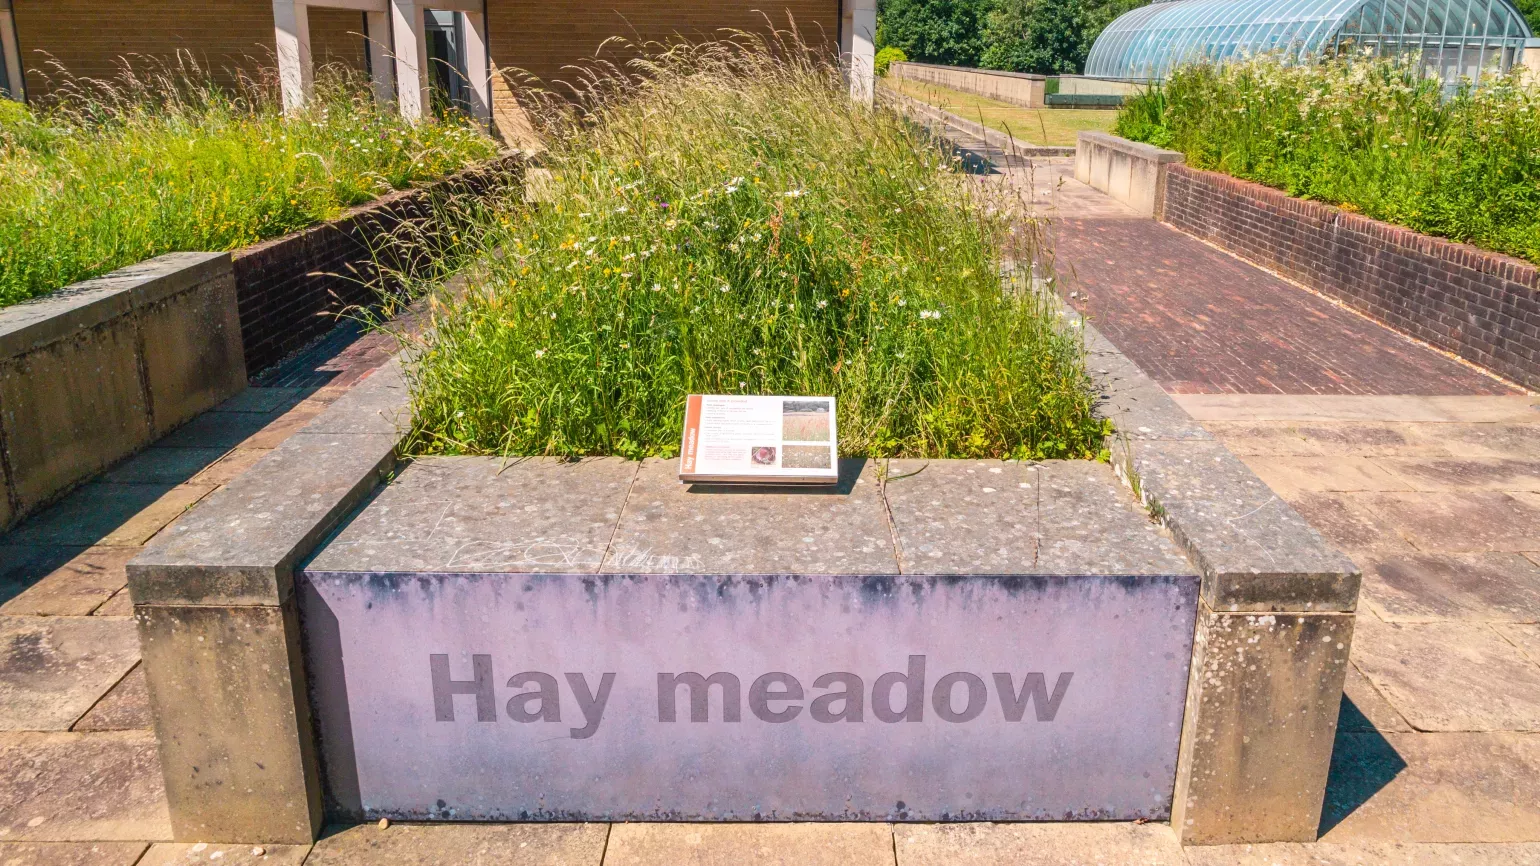 A planting of hay meadow plants